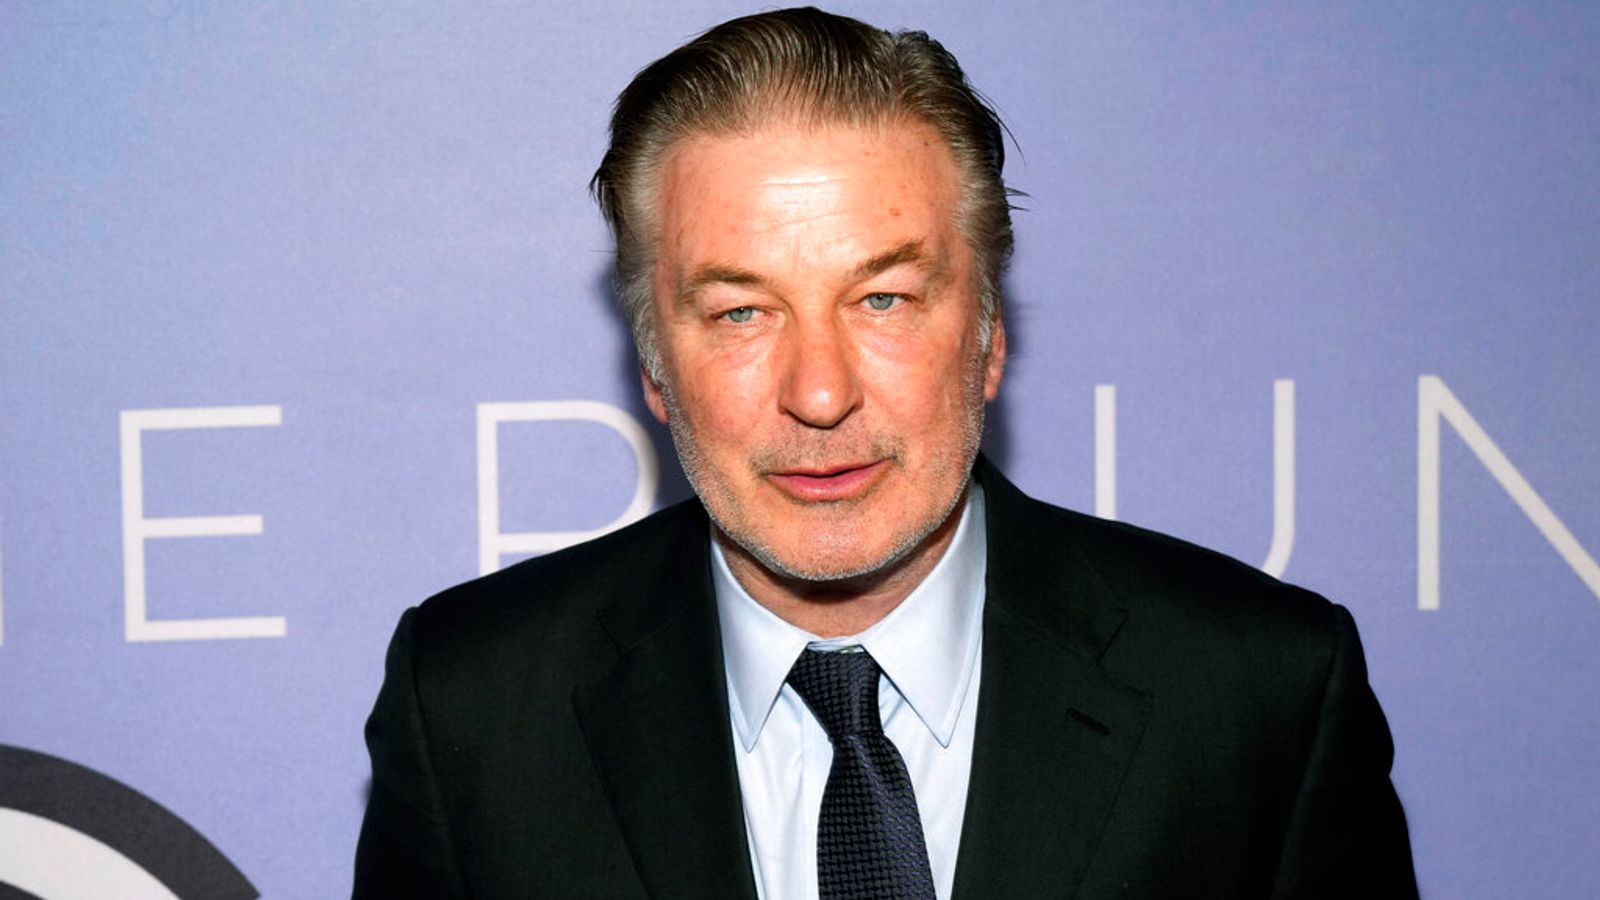 Alec Baldwin could still be charged over Rust shooting after new gun test casts doubt on his account